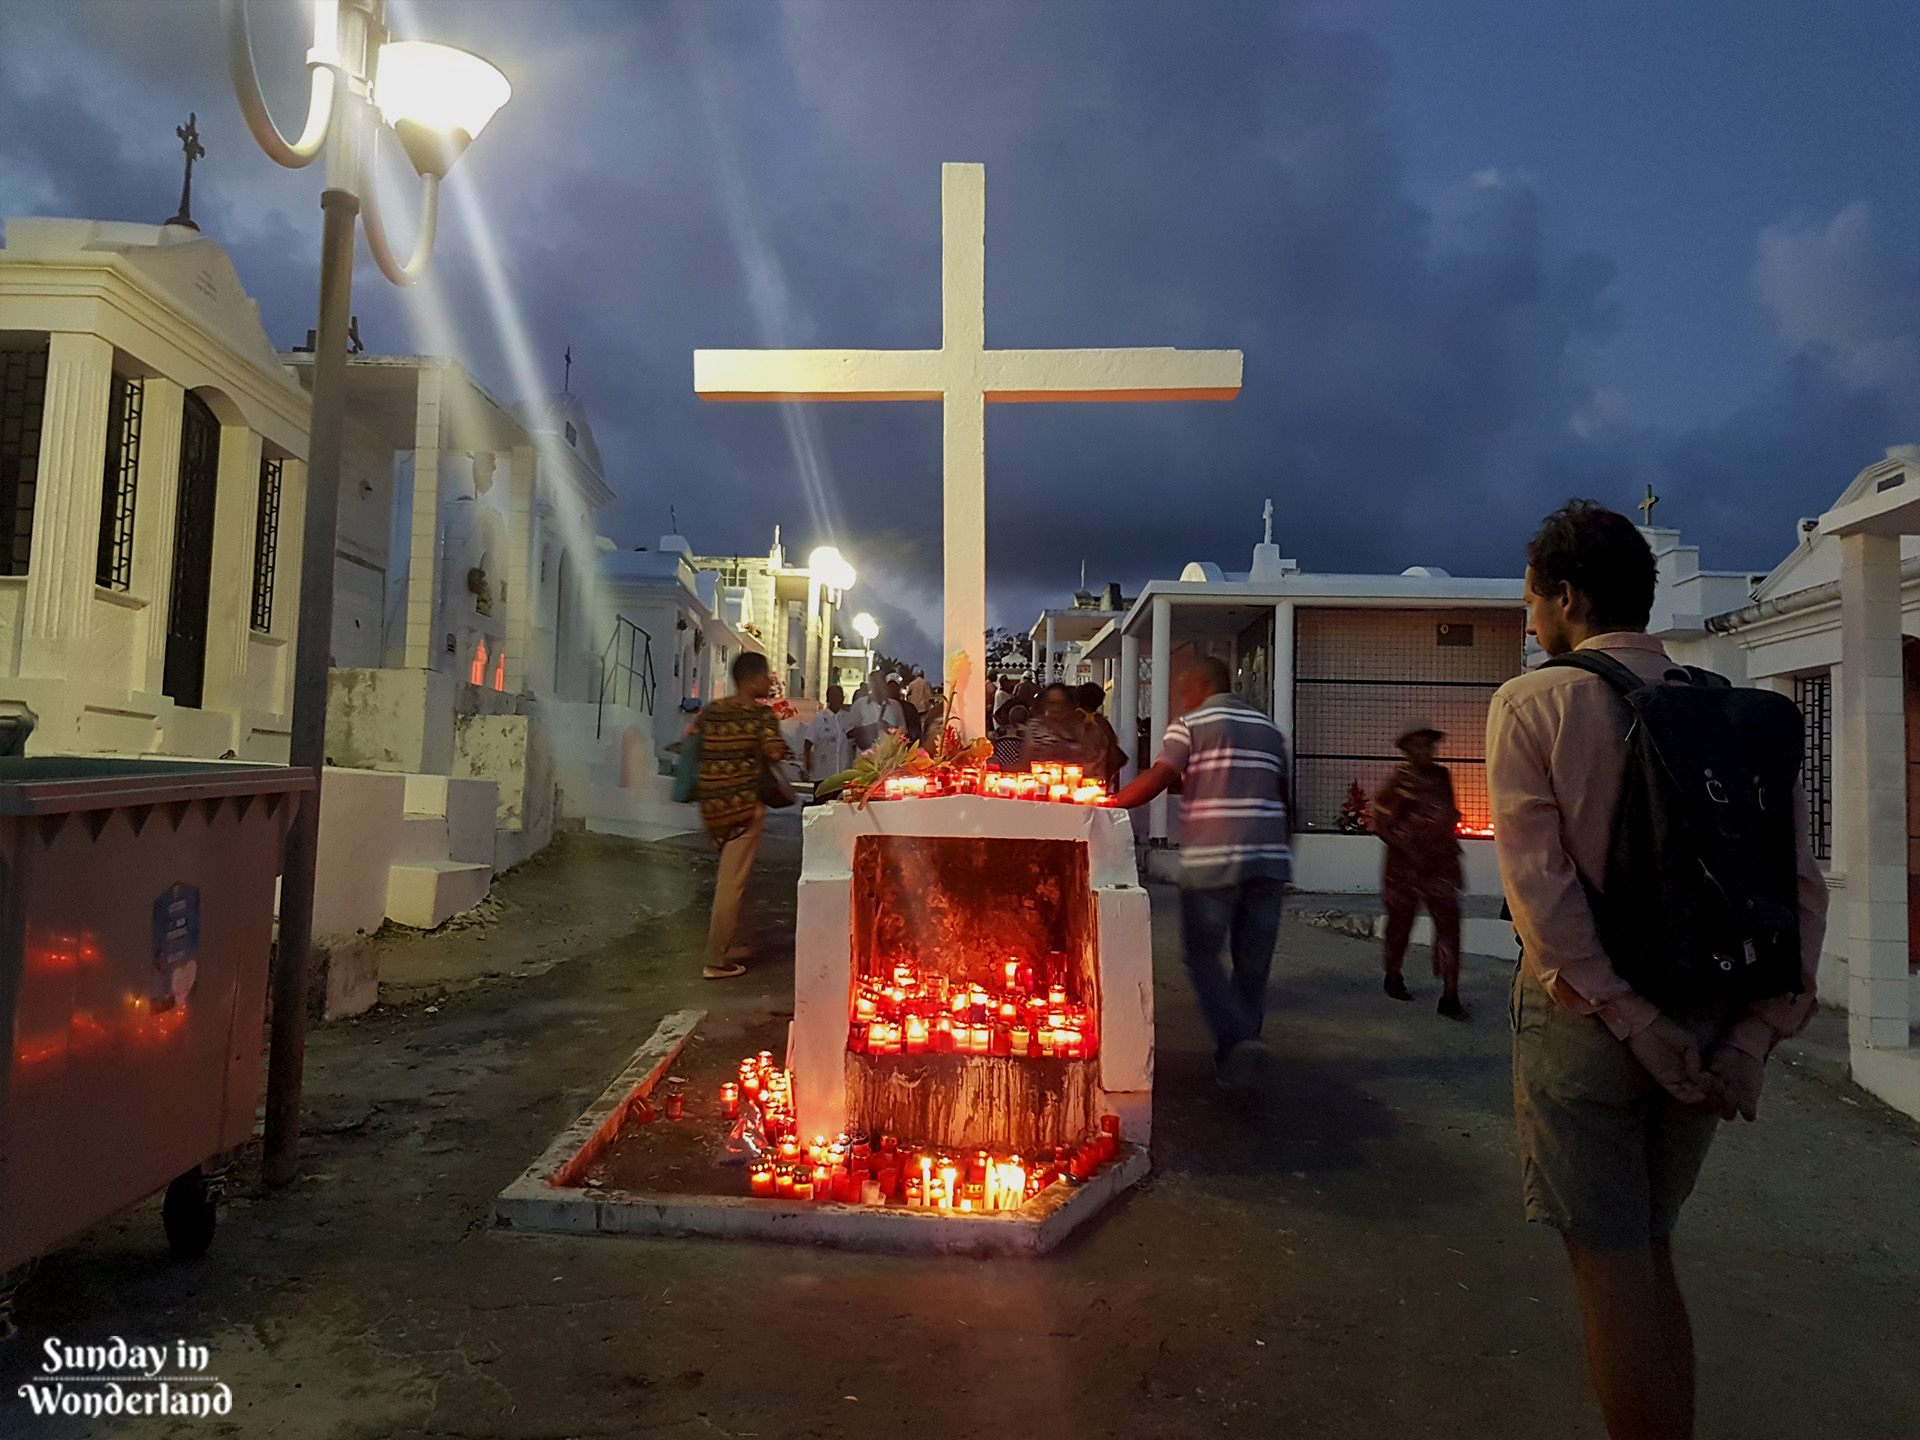 A cross in main alley in the cemetery in Sainte-Anne, Guadeloupe - Sunday in Wonderland Blog